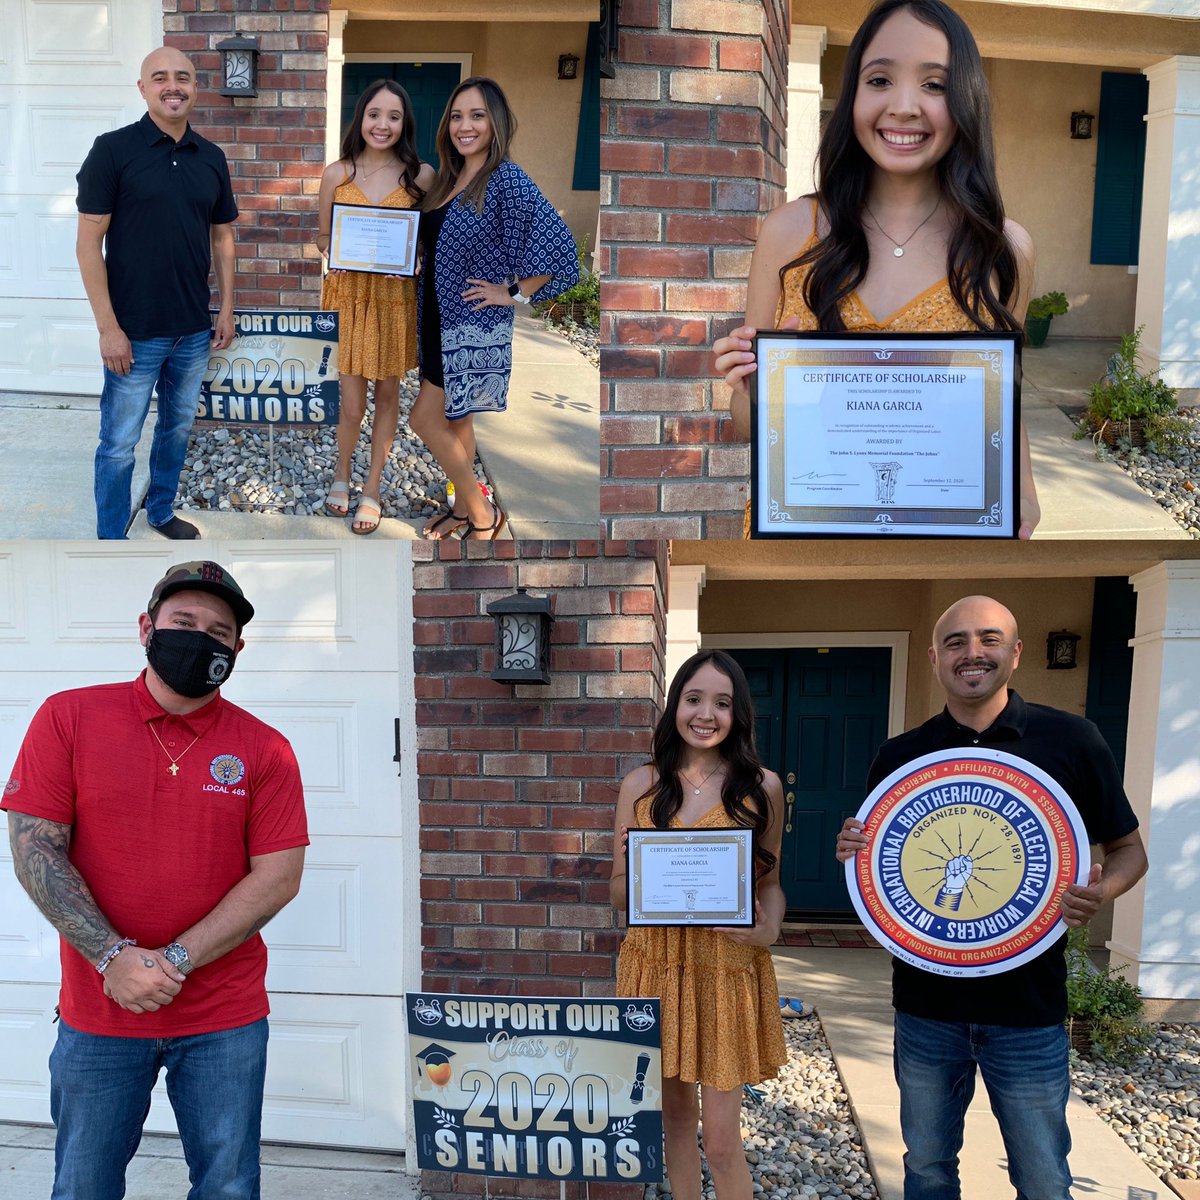 Kiana Garcia daughter of a @ibew465 members receiving her certificate for scholarship from the Johns Memorial Foundation fund! 

#scholarship #johnlyonsfoundation #johns #charity #scholarships #unionstrong #electrical #ibew #daughters #lineman @IBEW